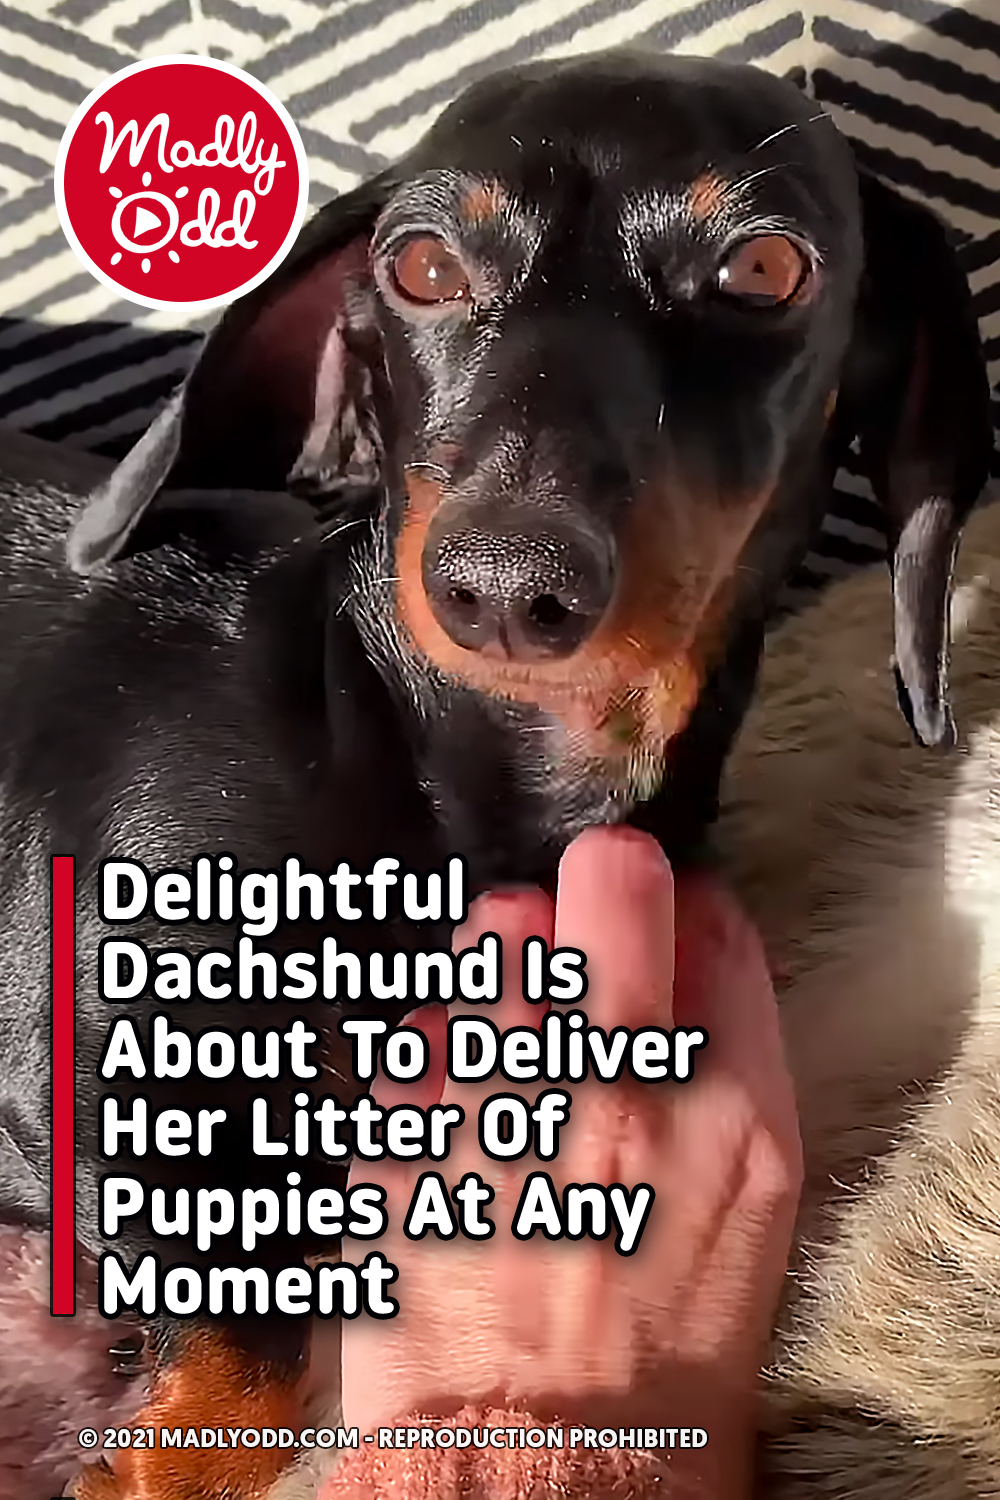 Delightful Dachshund Is About To Deliver Her Litter Of Puppies At Any Moment